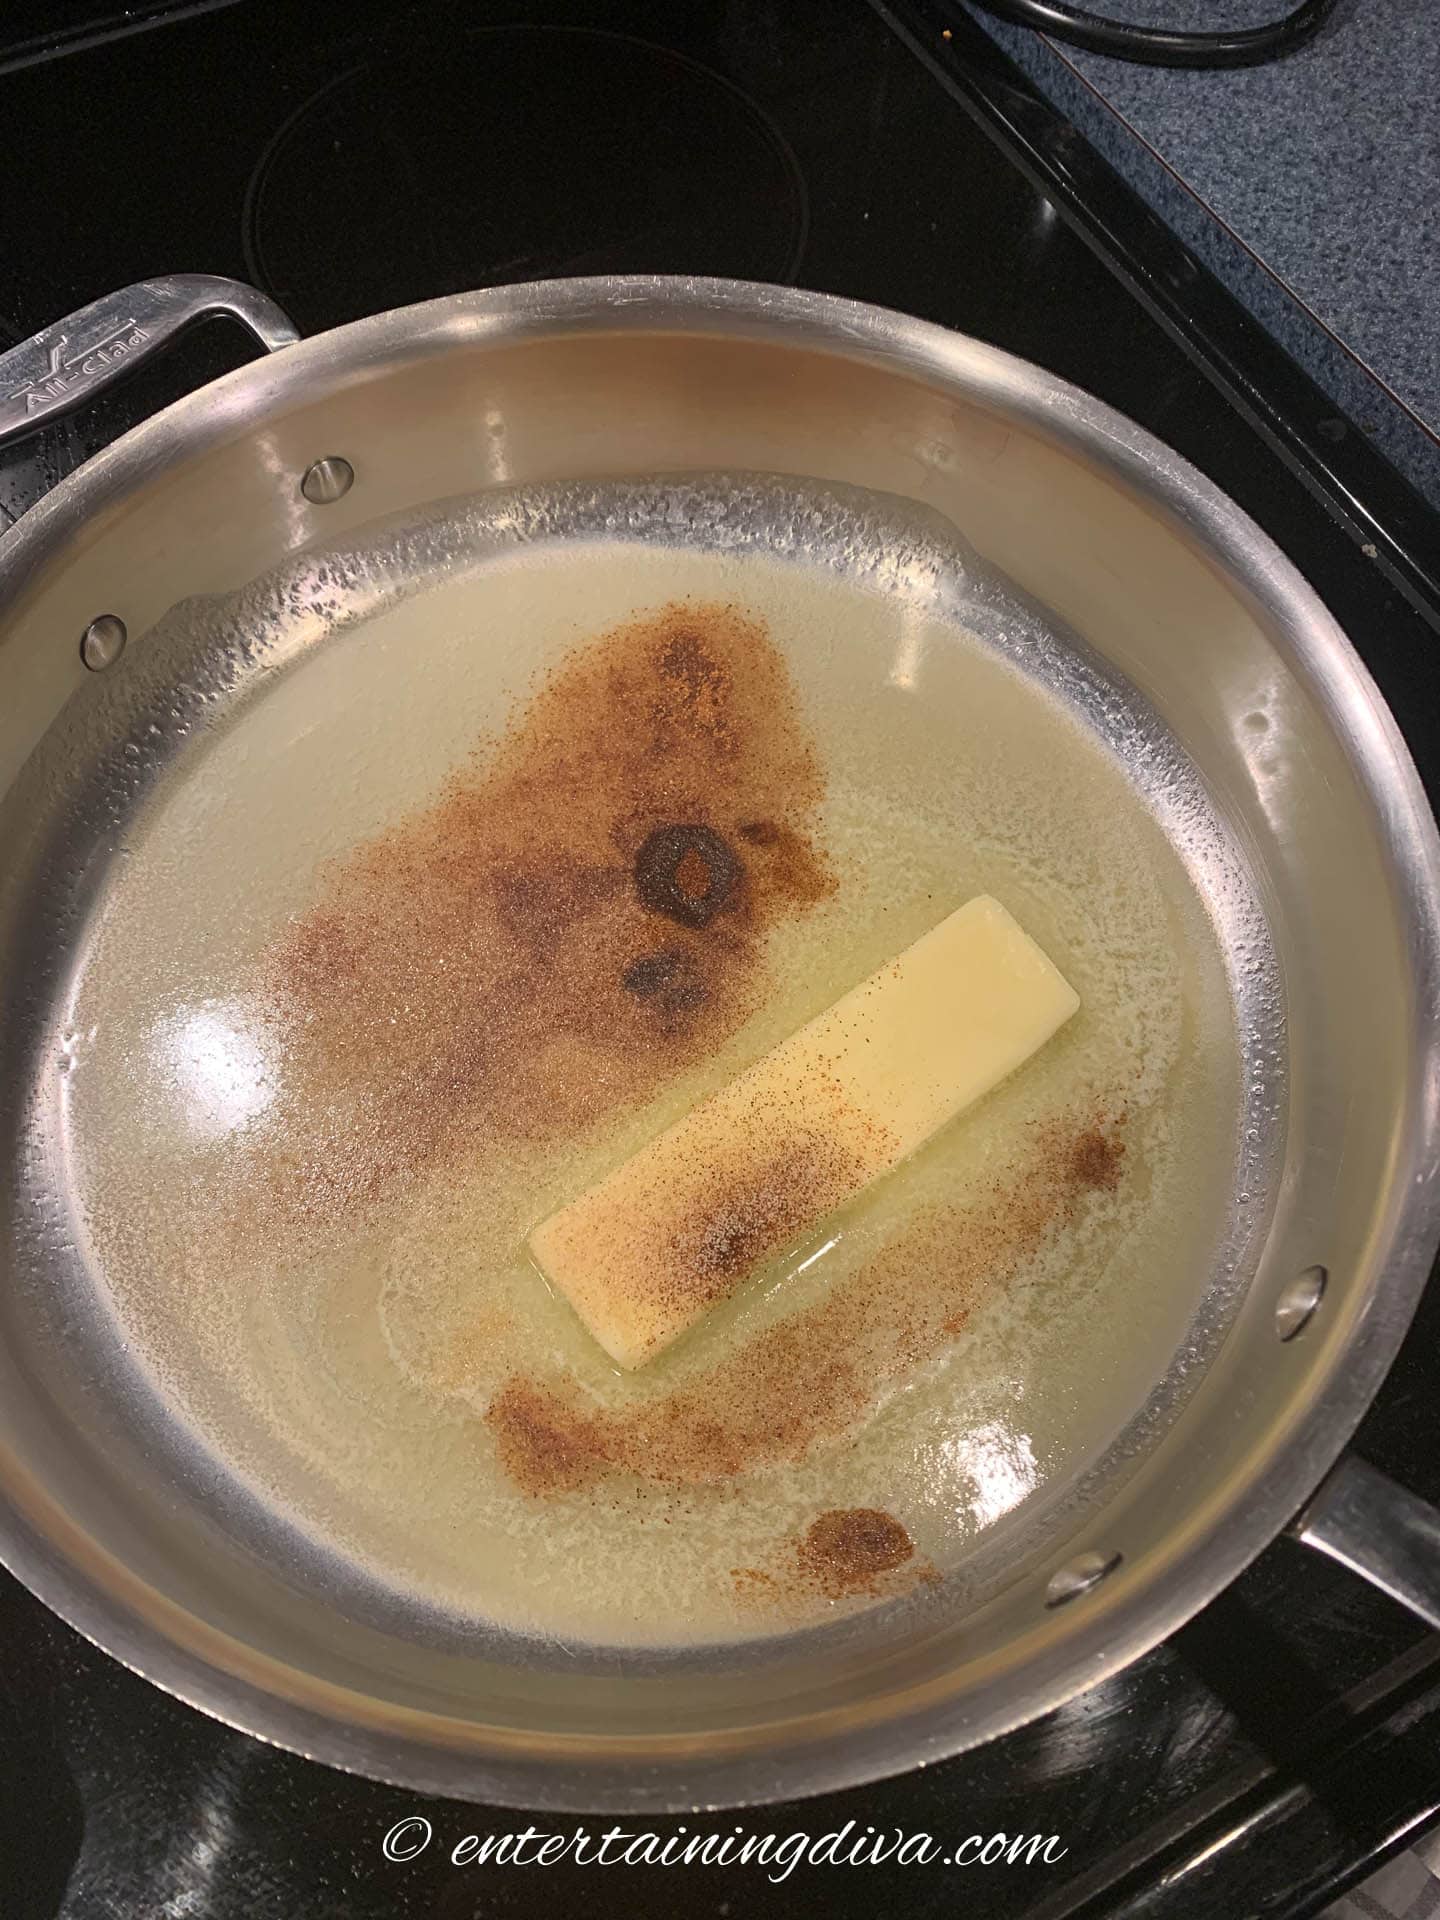 butter melting in a frying pan with garlic powder